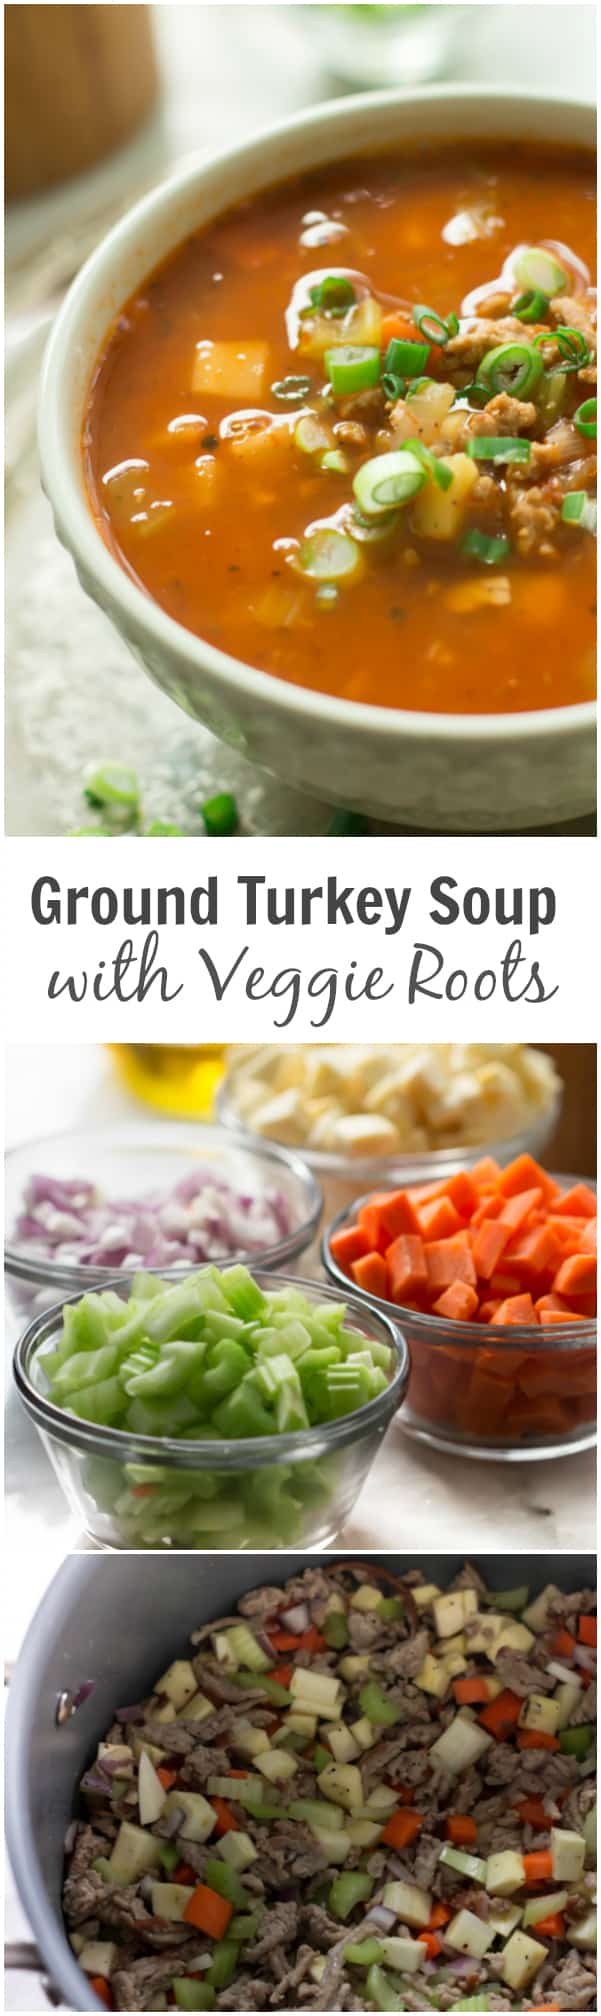 Ground Turkey Soup with Veggie Roots - This Ground Turkey Soup with Veggie Roots is made with carrots, parsnip and extra-lean ground turkey. This warming and nutritious soup is also great to freeze. Enjoy!